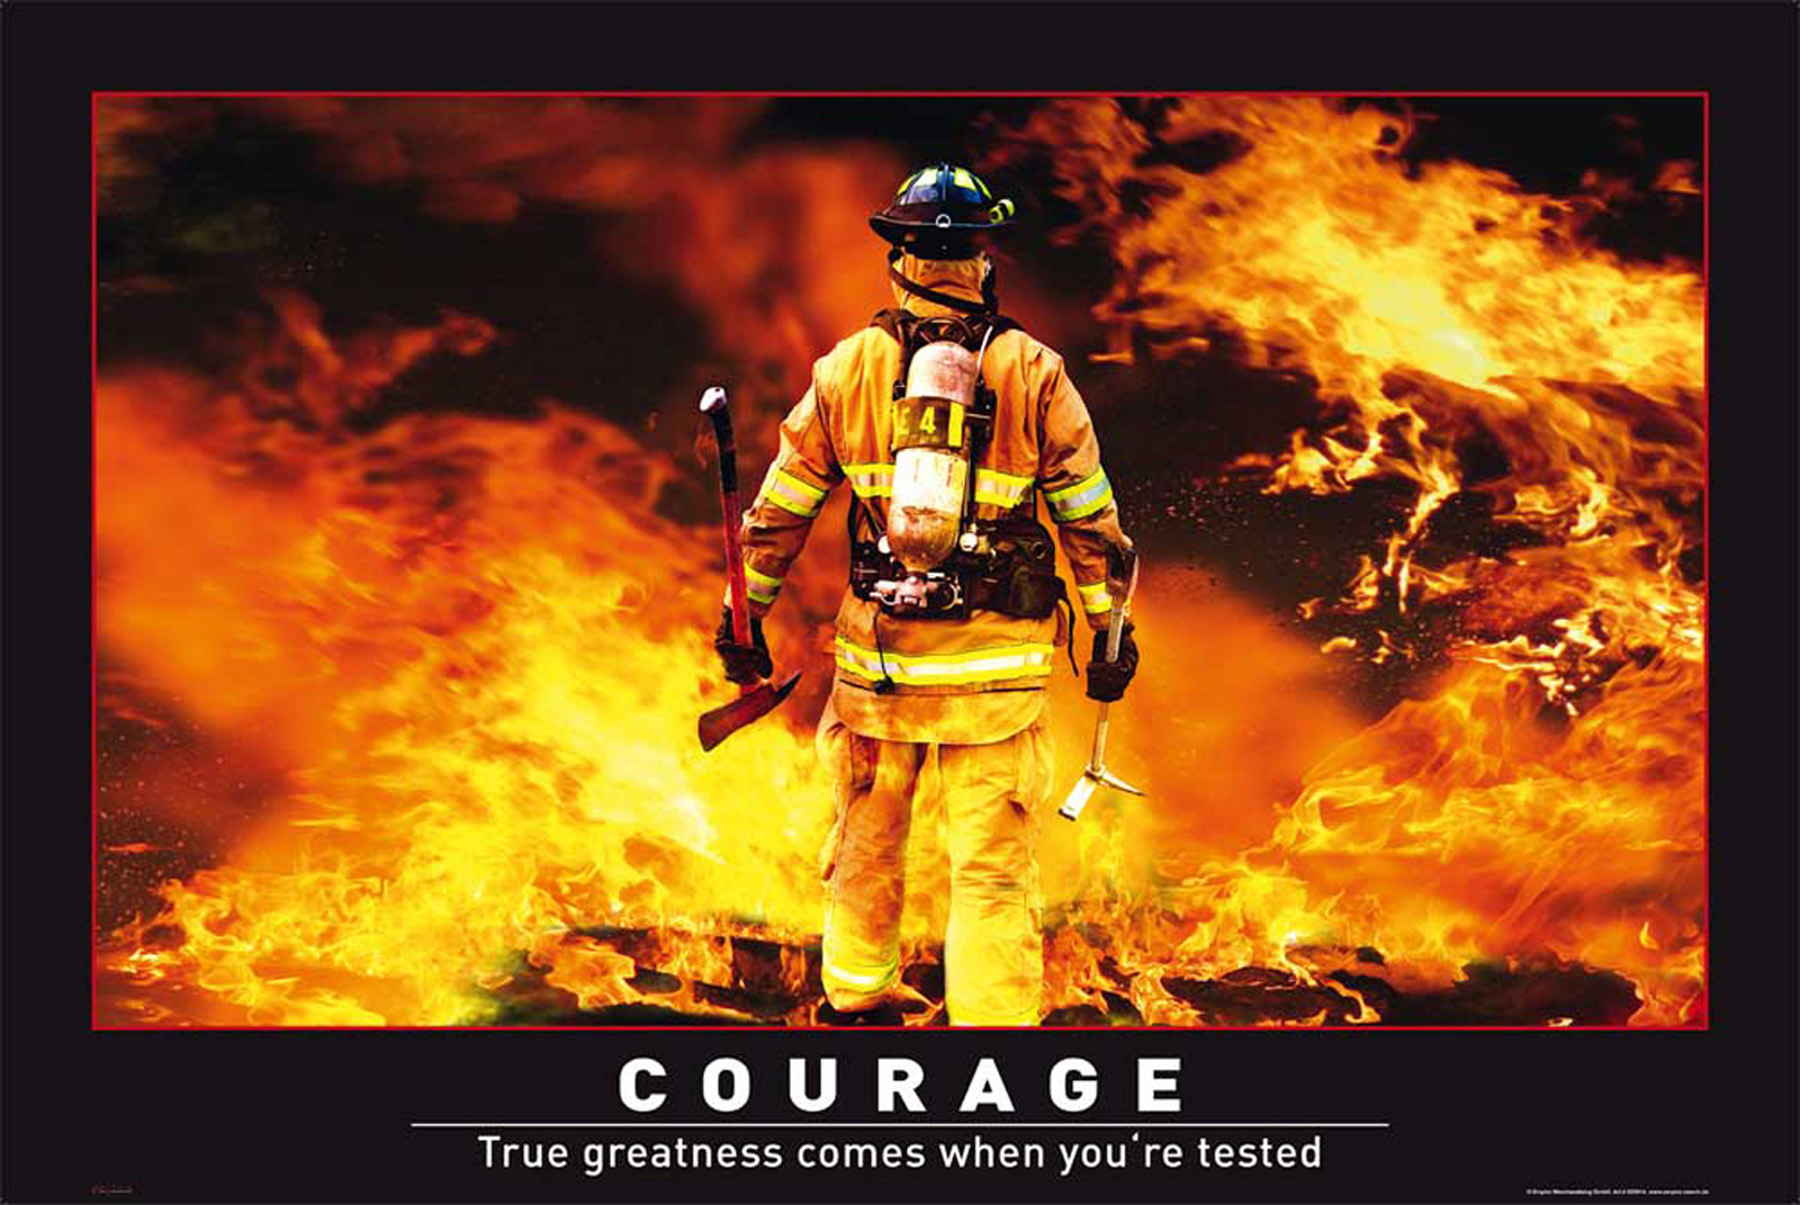 Courage - Motivational Firefighter